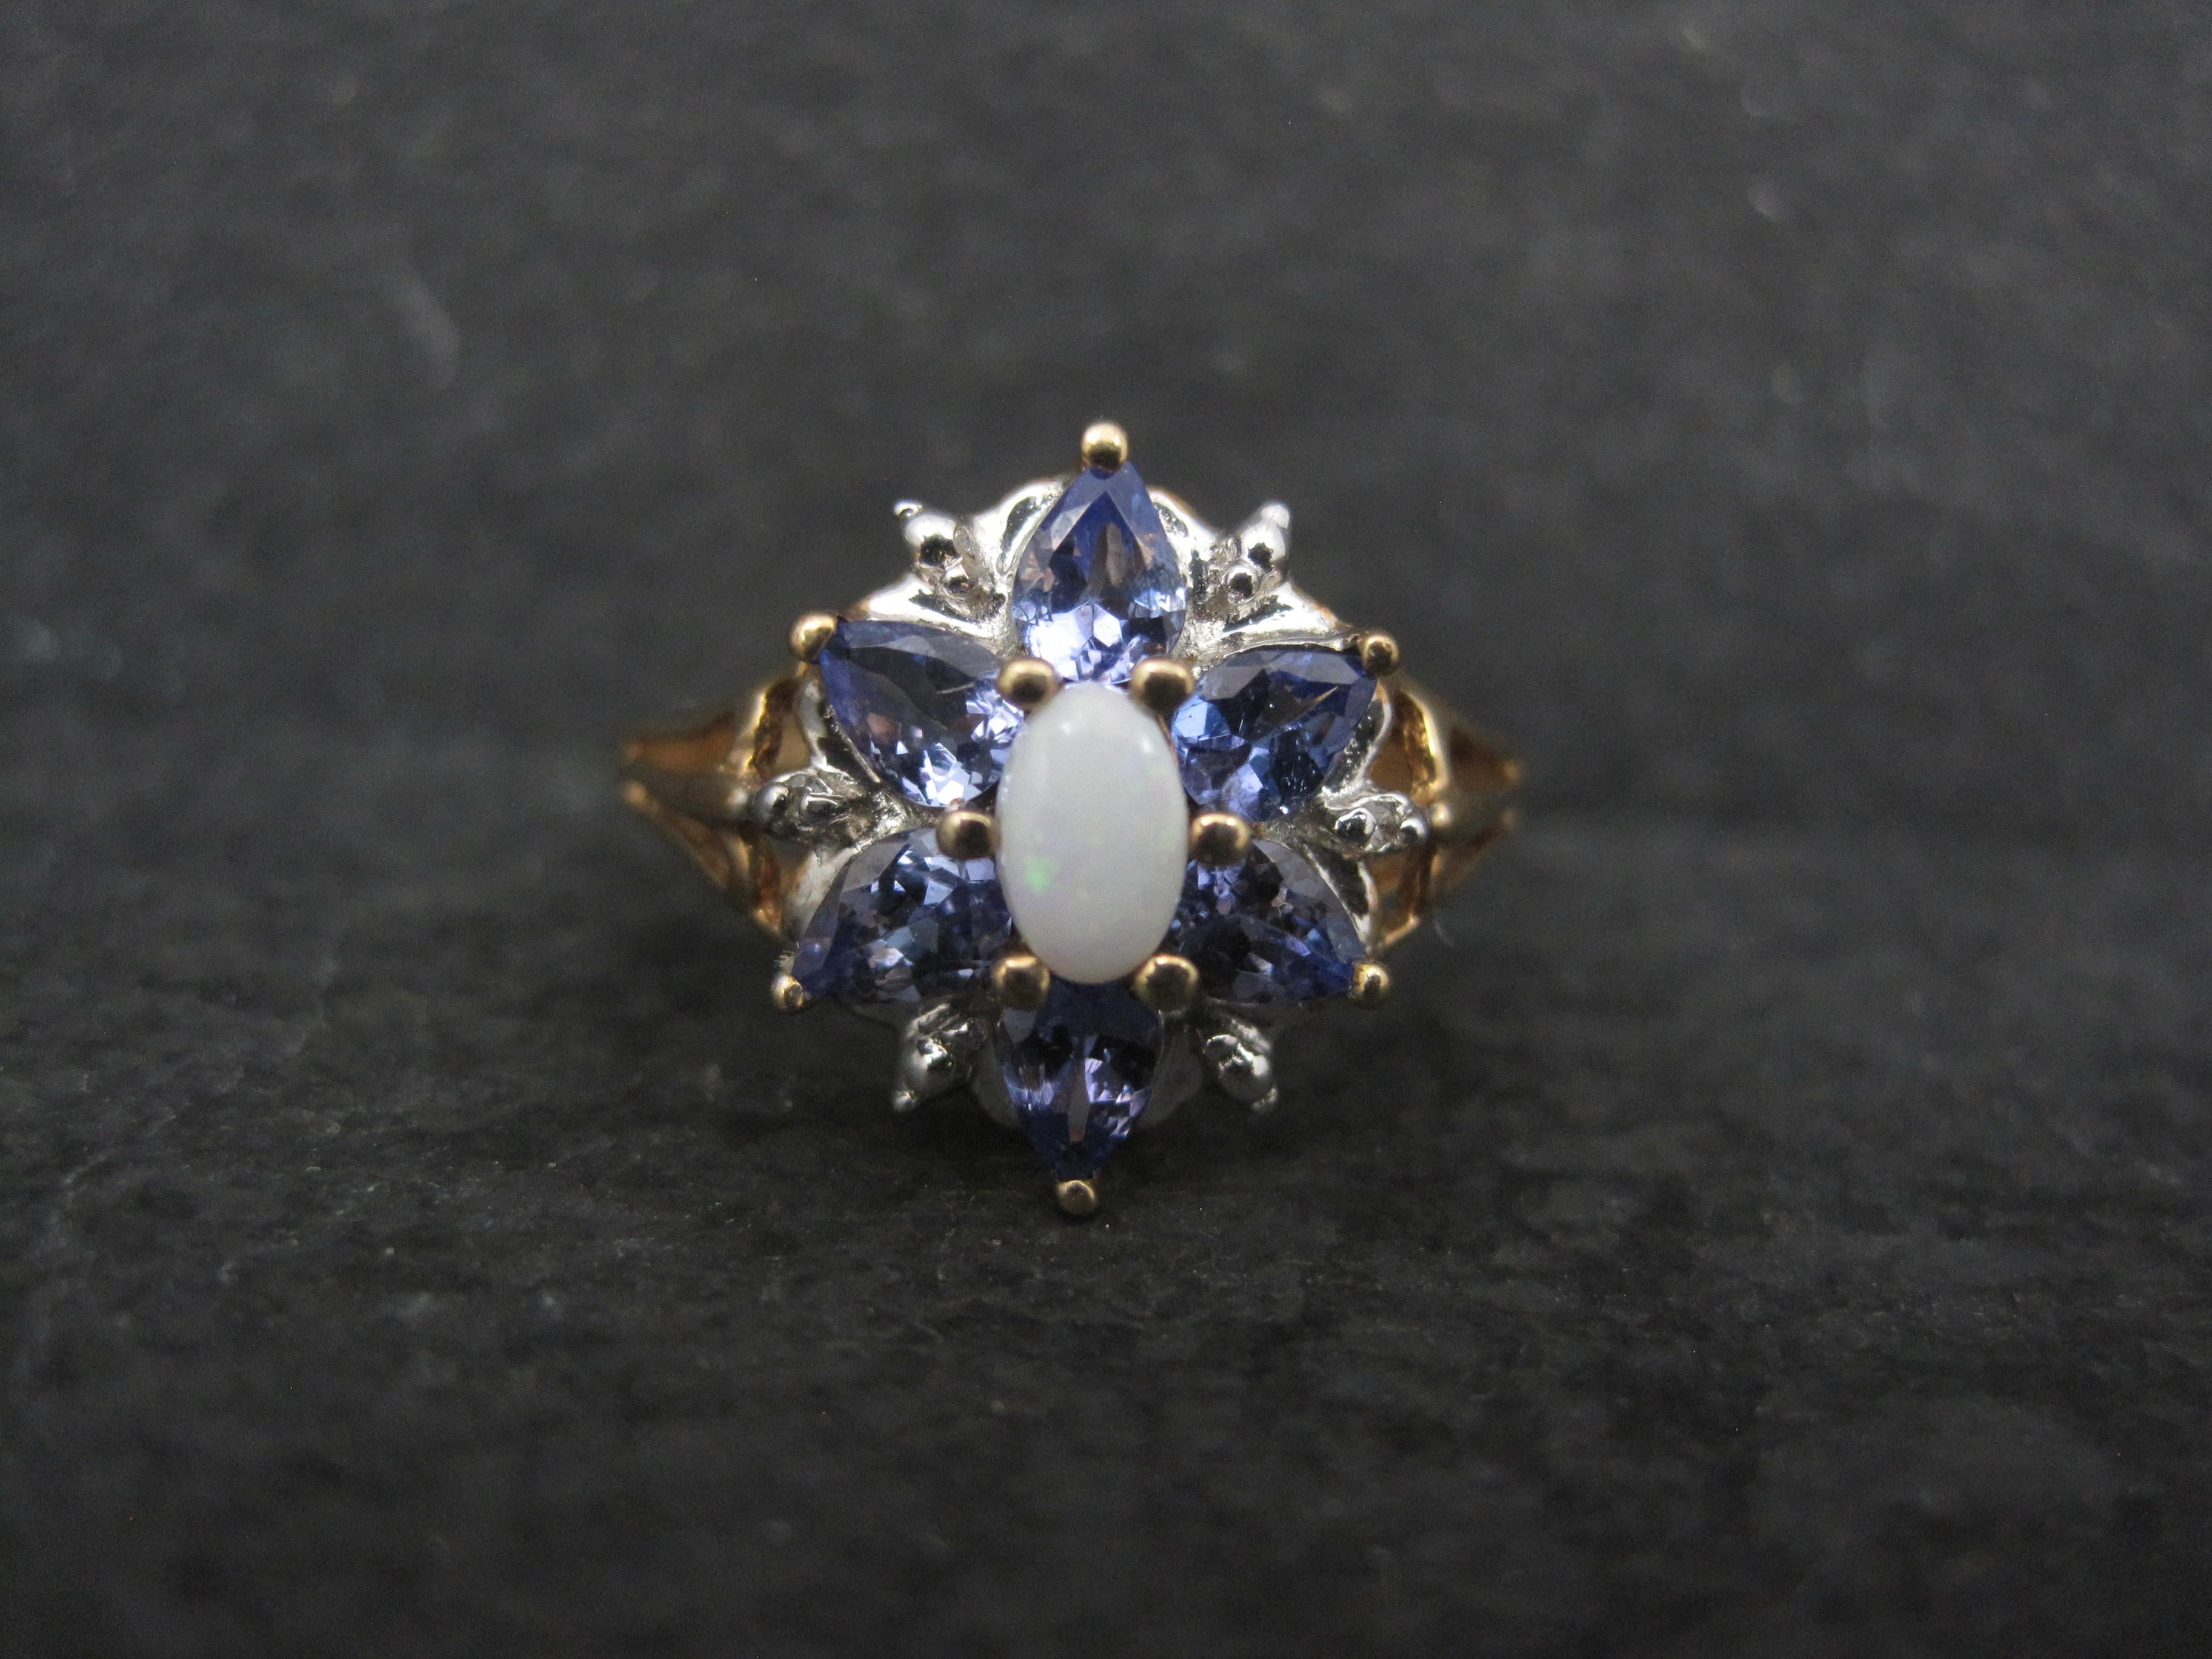 This stunning estate ring features a 3x5 oval cut, white opal accented by 6 pear cut tanzanites.
The face of the ring measures 1/2 inch from knuckle to knuckle.
The ring is 10K yellow gold.
It is a size 7.
It is in excellent overall condition.